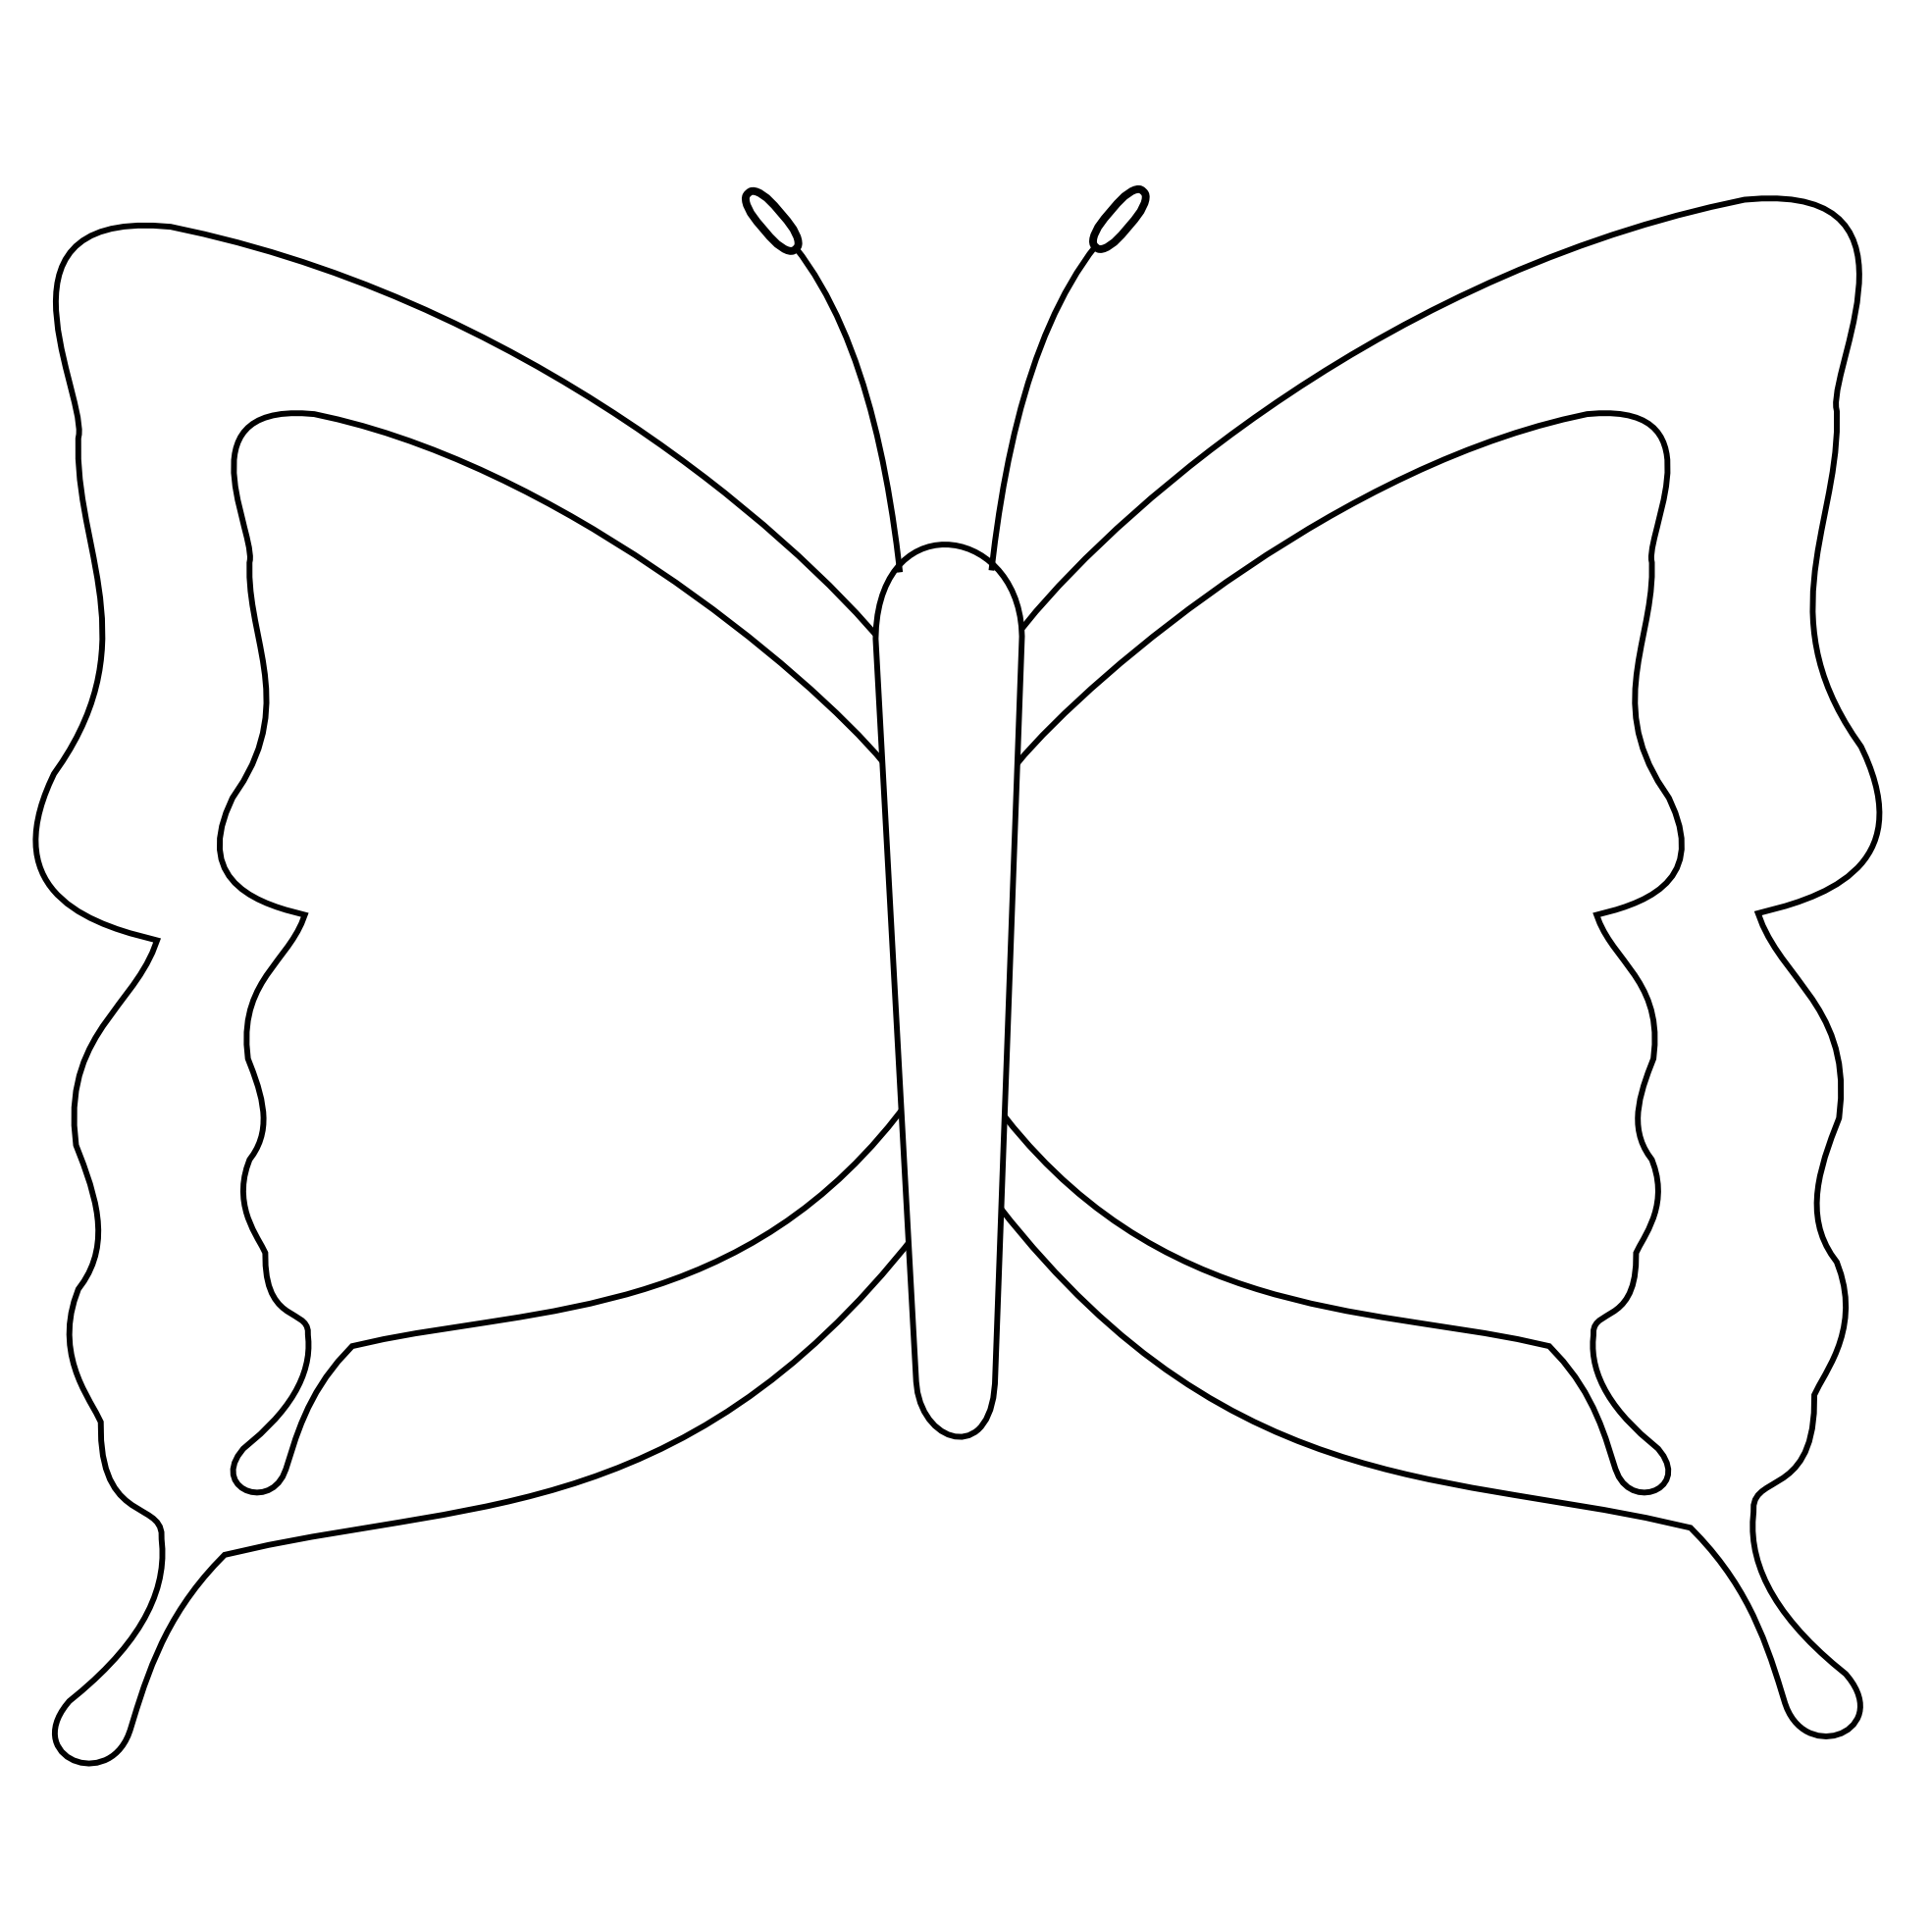 Black And White Butterfly Images - Cliparts.co